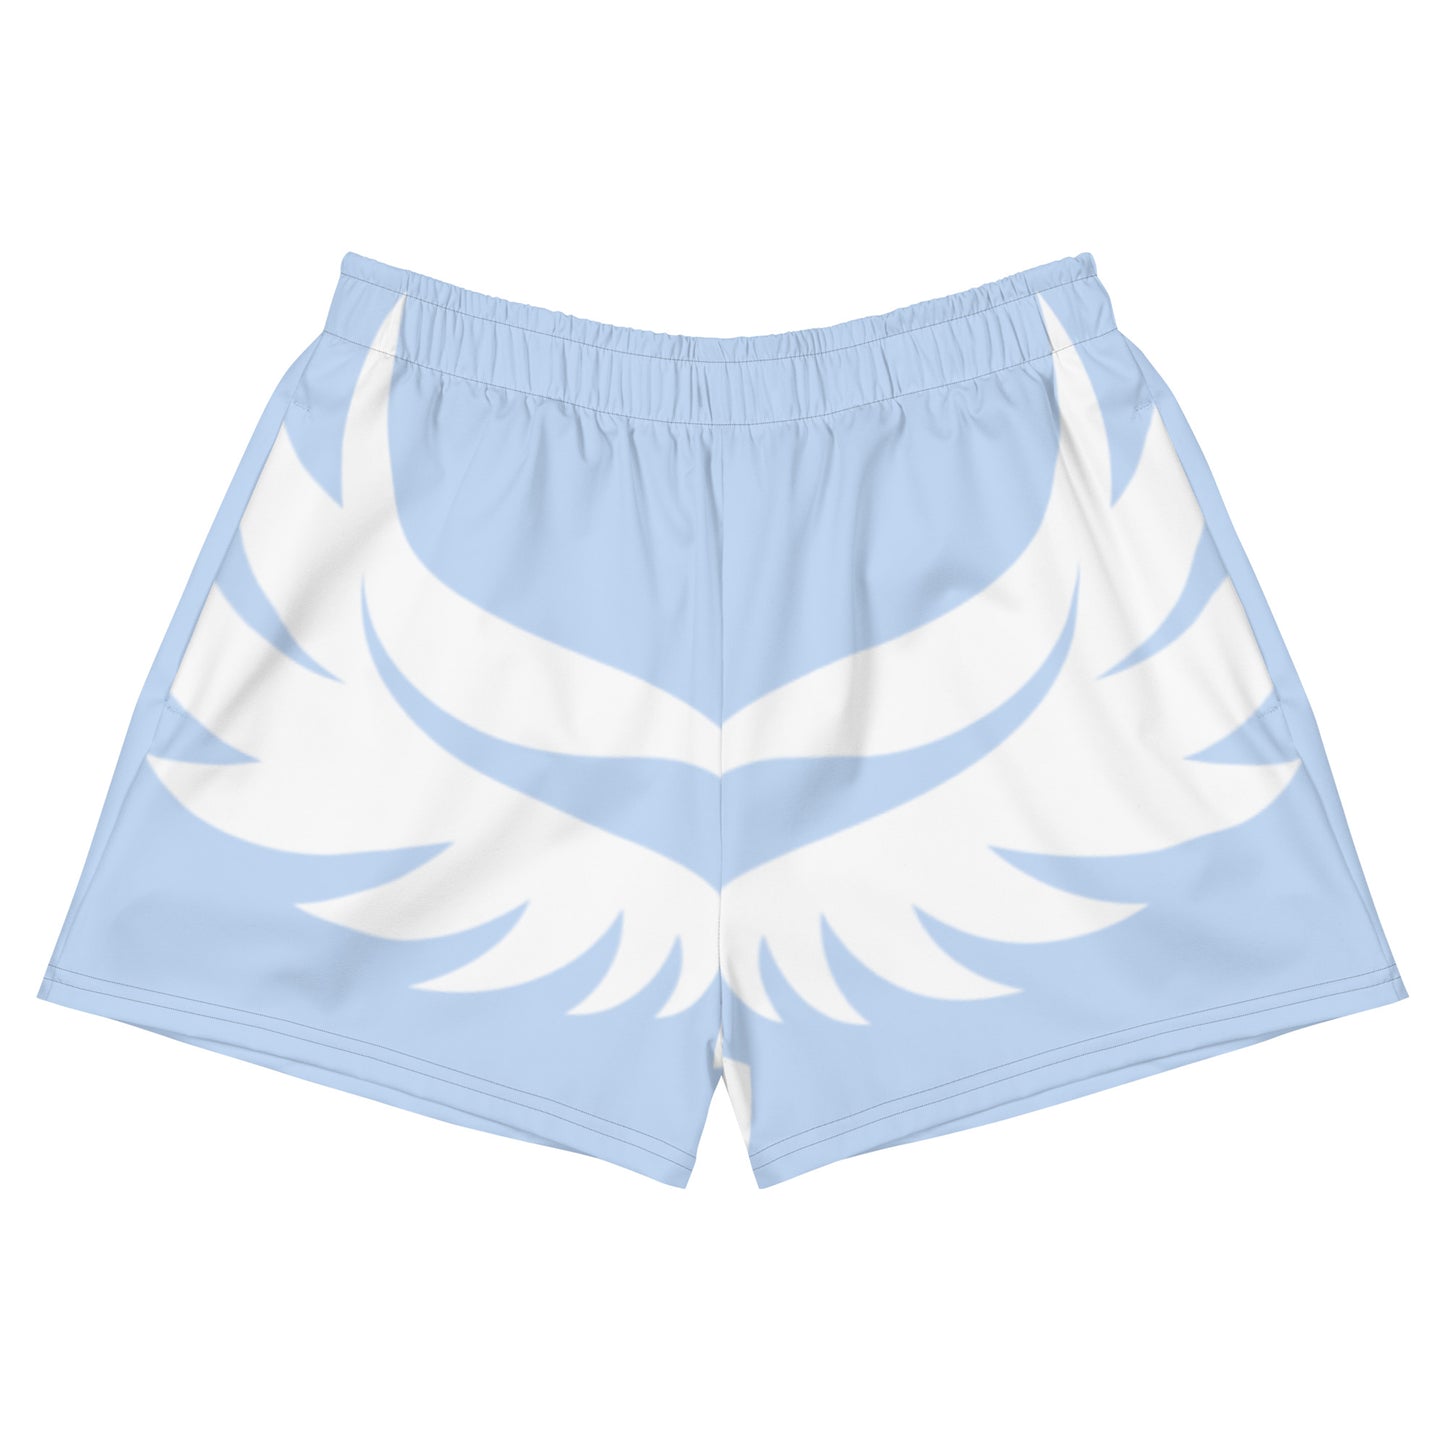 Women’s Wings Athletic Shorts